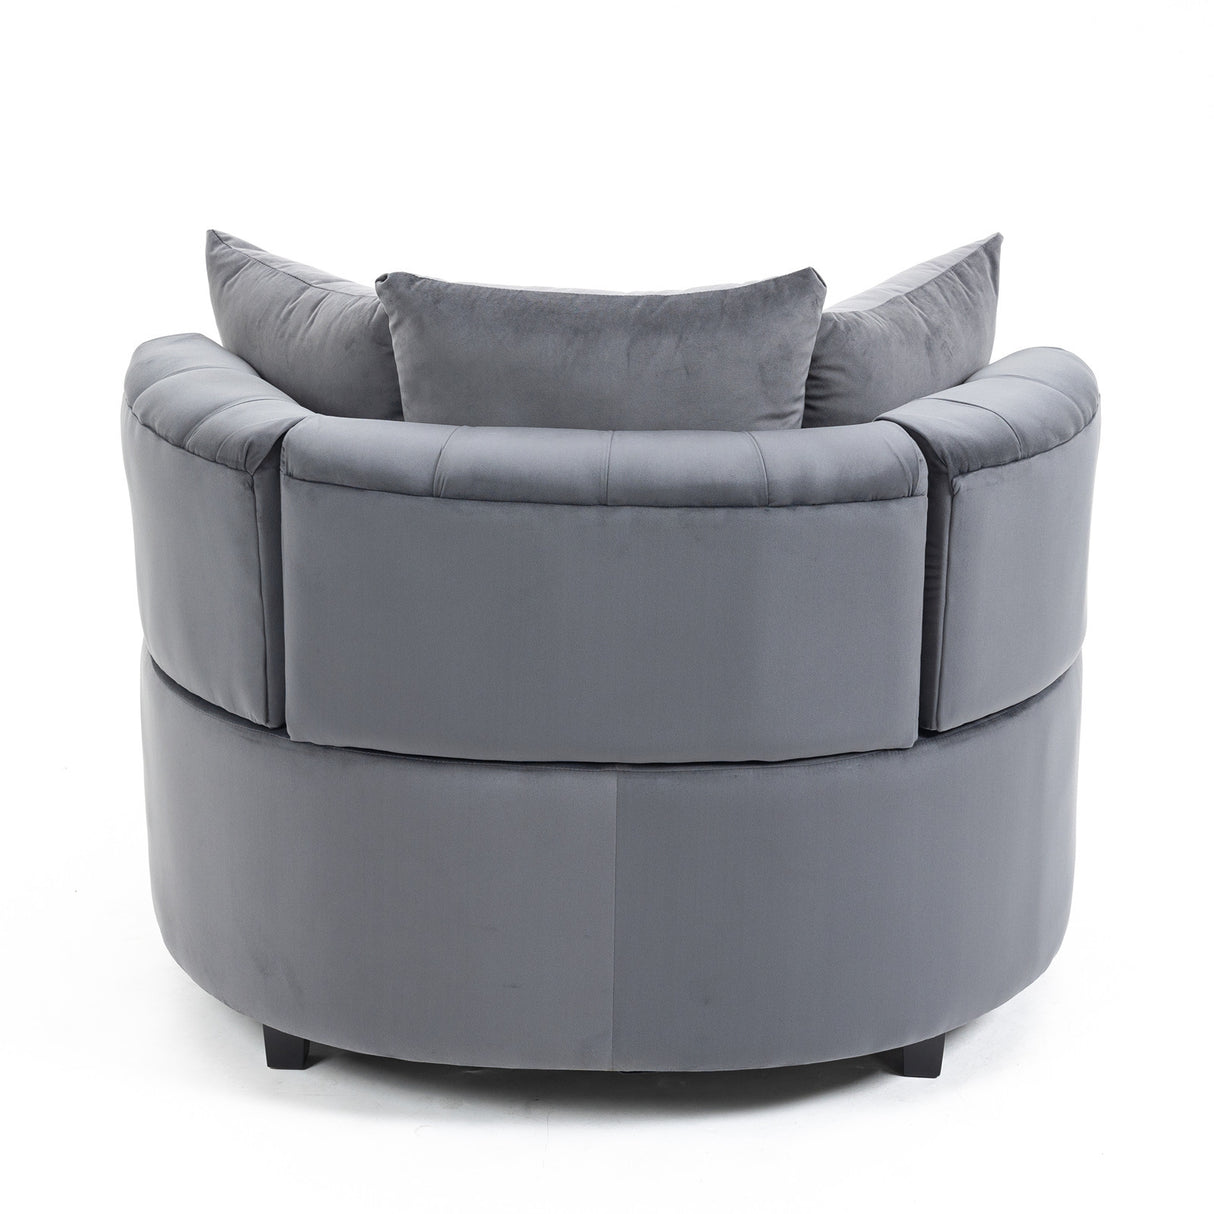 A&A Furniture,Accent Chair / Classical Barrel Chair for living room / Modern Leisure Chair (Grey) Home Elegance USA